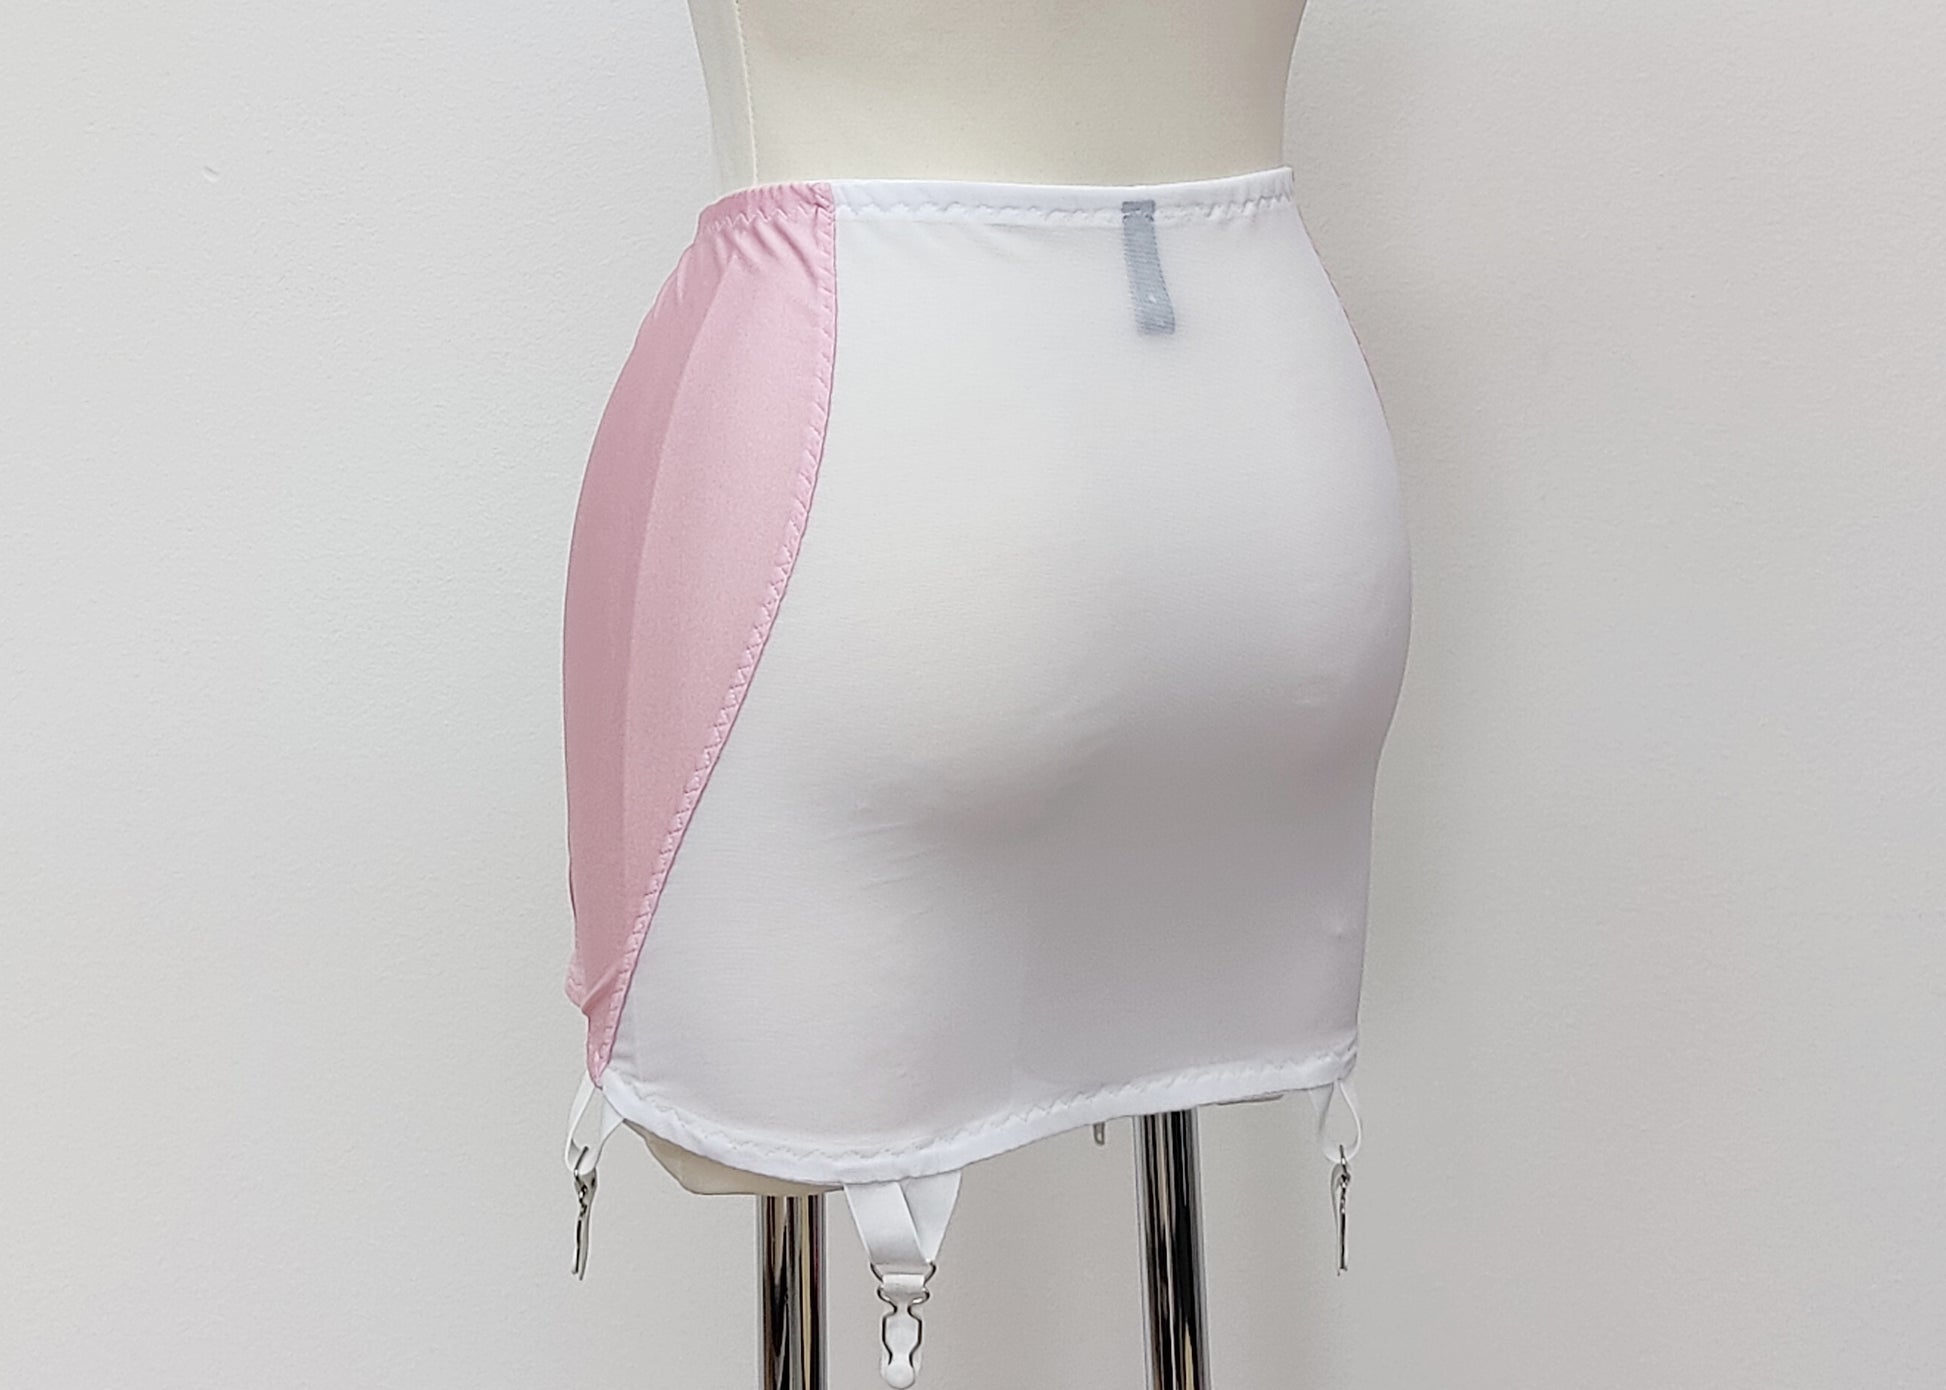 Adding some vintage style with an open bottom girdle and s…